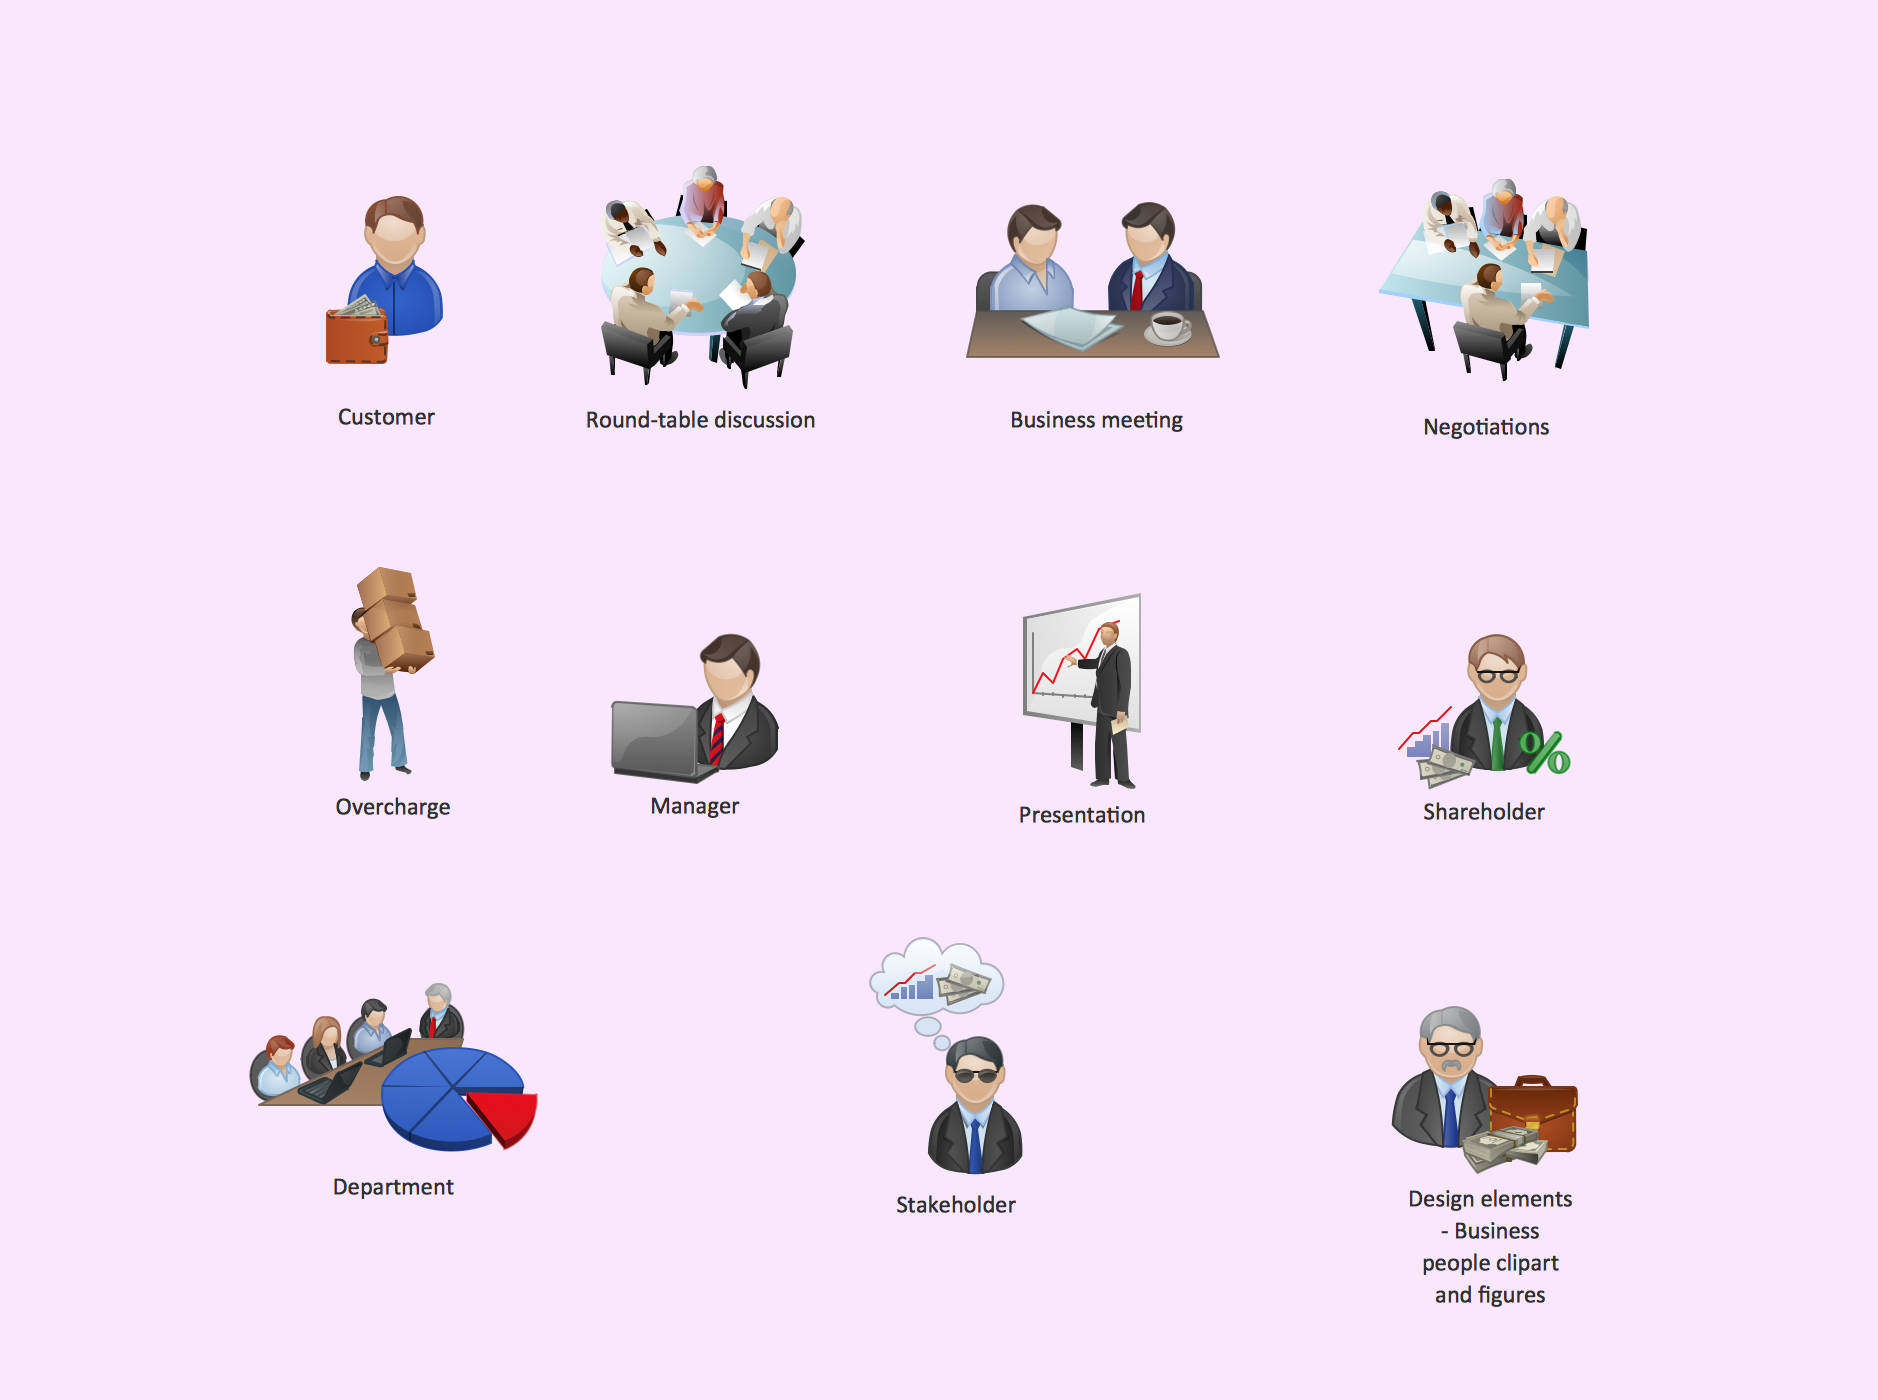 microsoft clipart gallery business - photo #13